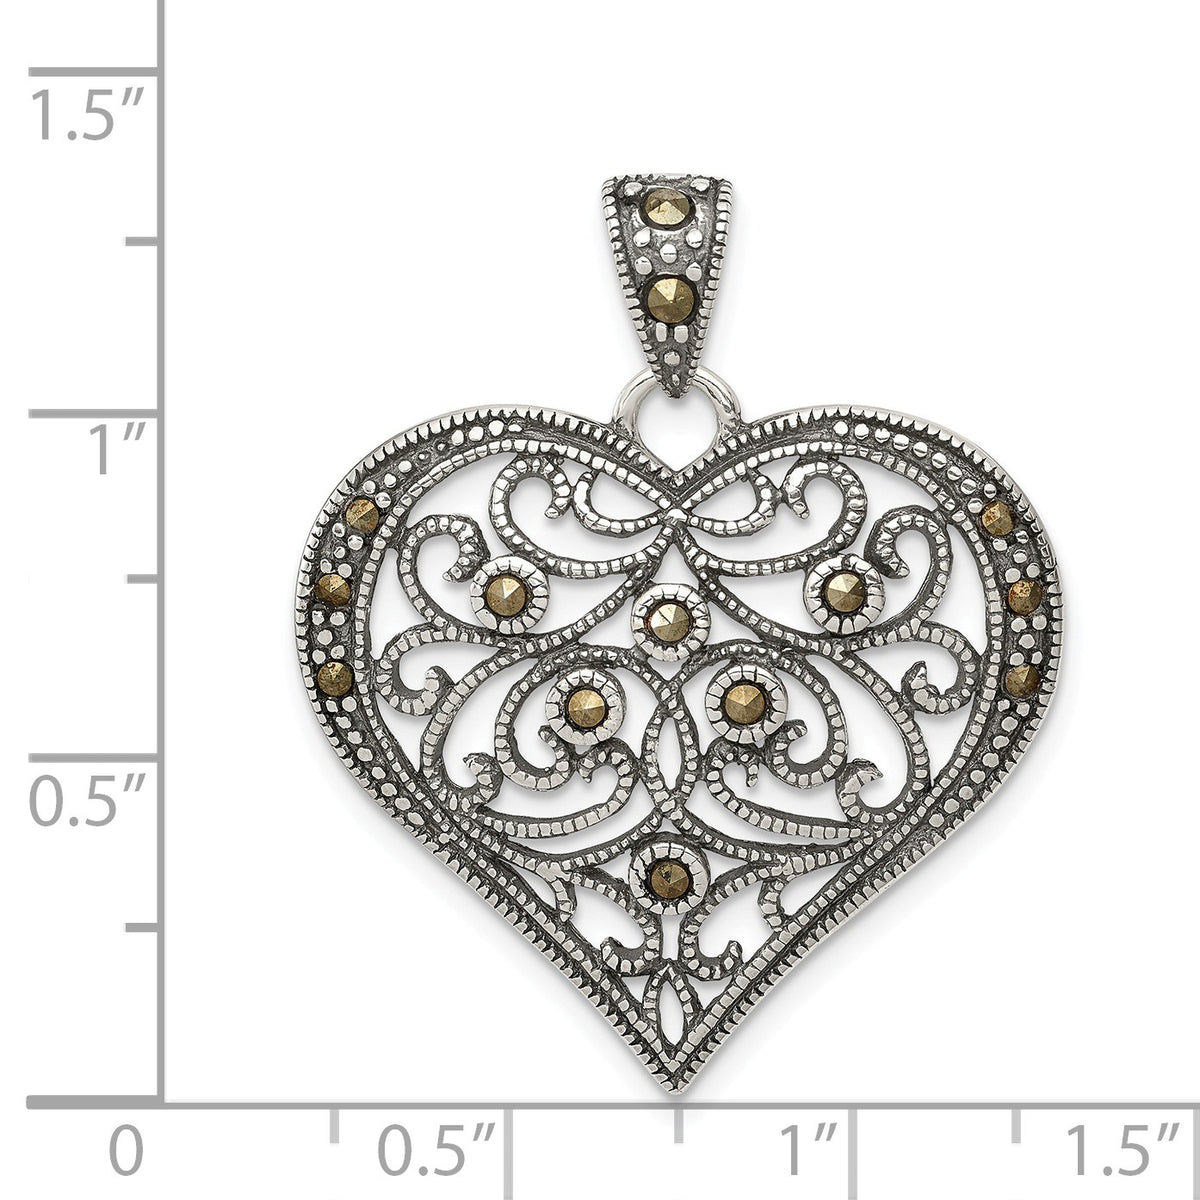 Alternate view of the Sterling Silver and Marcasite Antiqued Scroll Heart Pendant, 29mm by The Black Bow Jewelry Co.